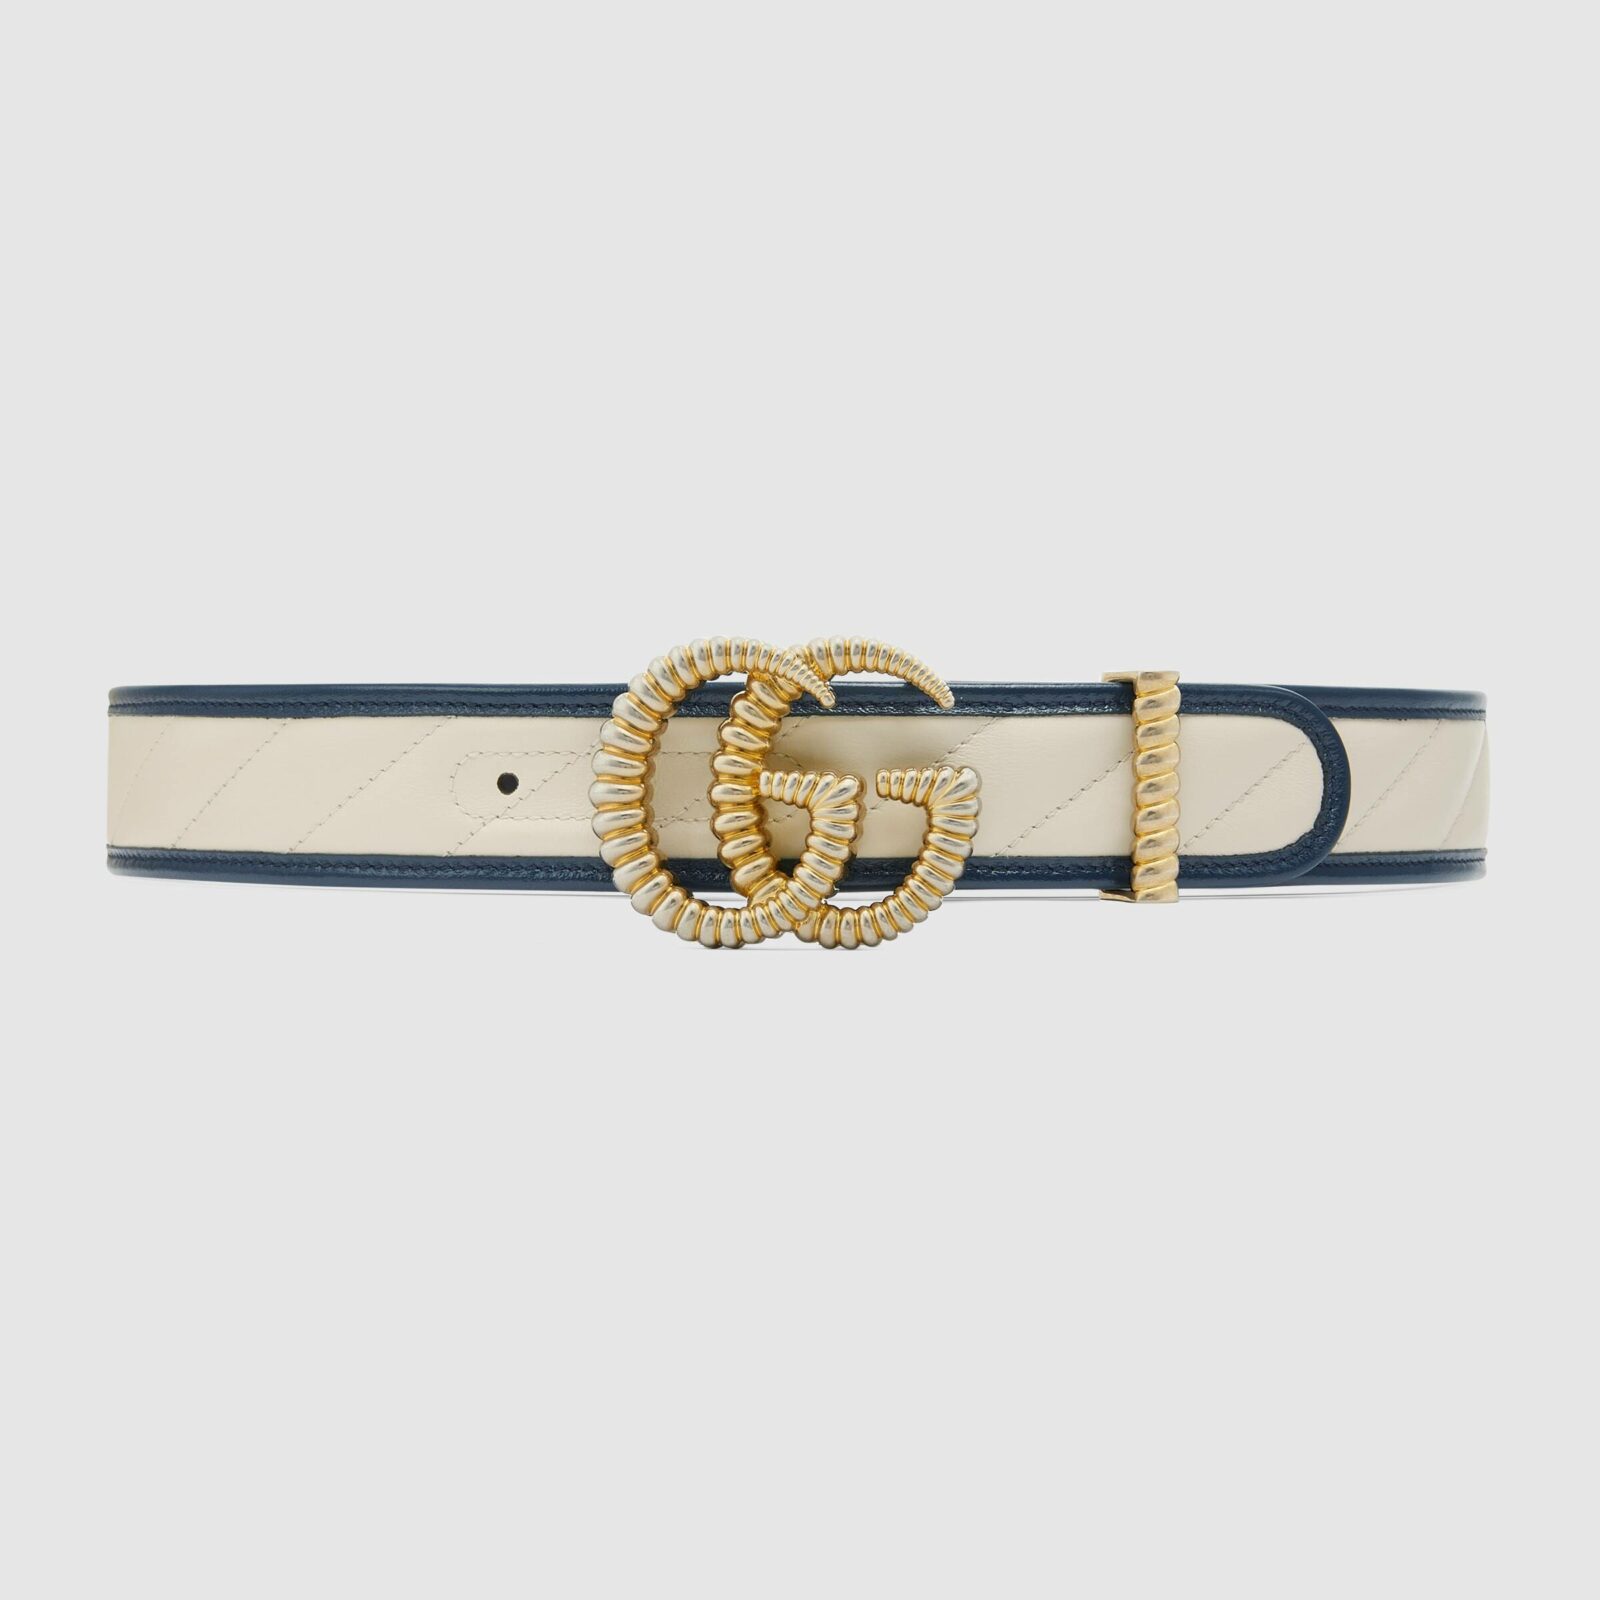 Emtalks: Gucci Belt Buying Guide - Gucci Belt Sizing Guide And Review